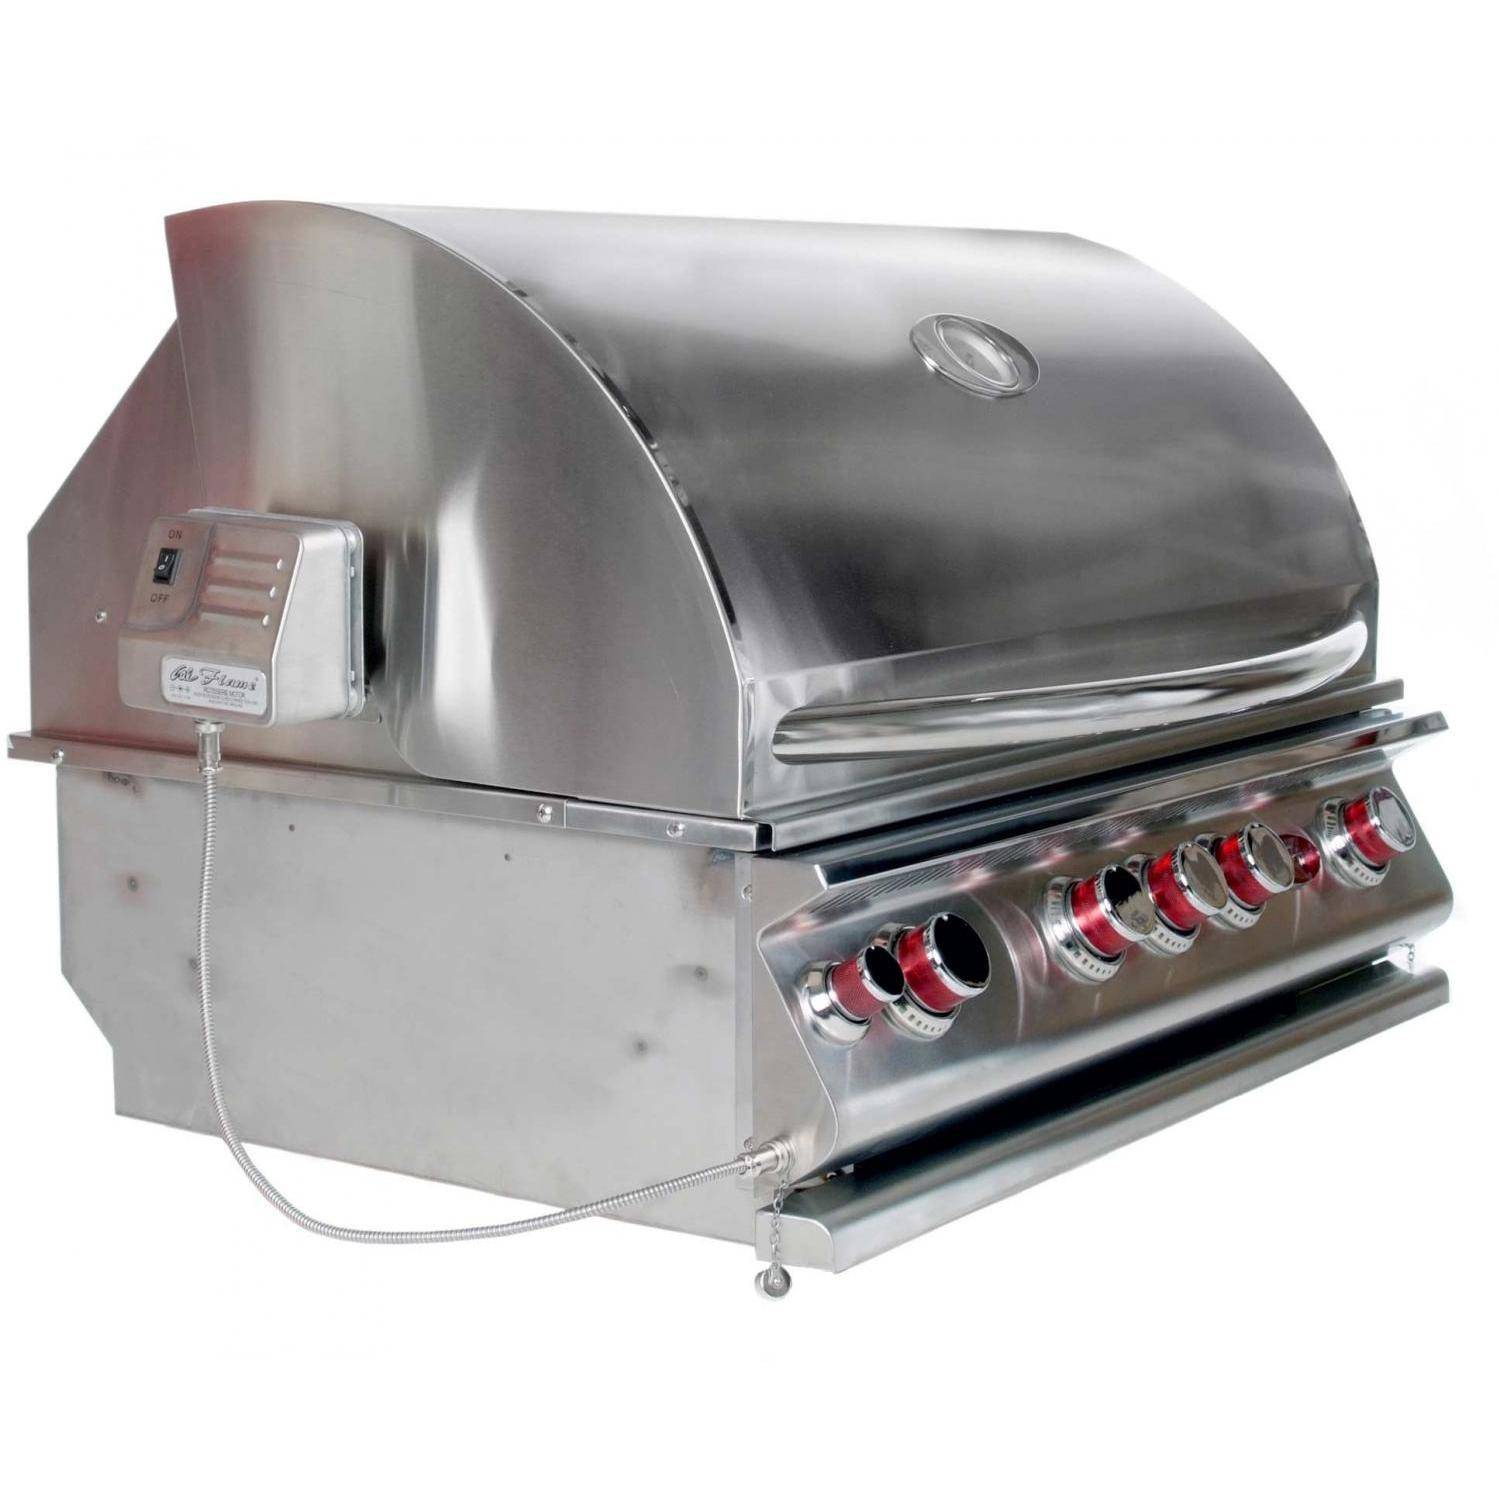 Cal Flame - BBQ Built In Grills Convection Series - 4 Burner  - BBQ18874CP